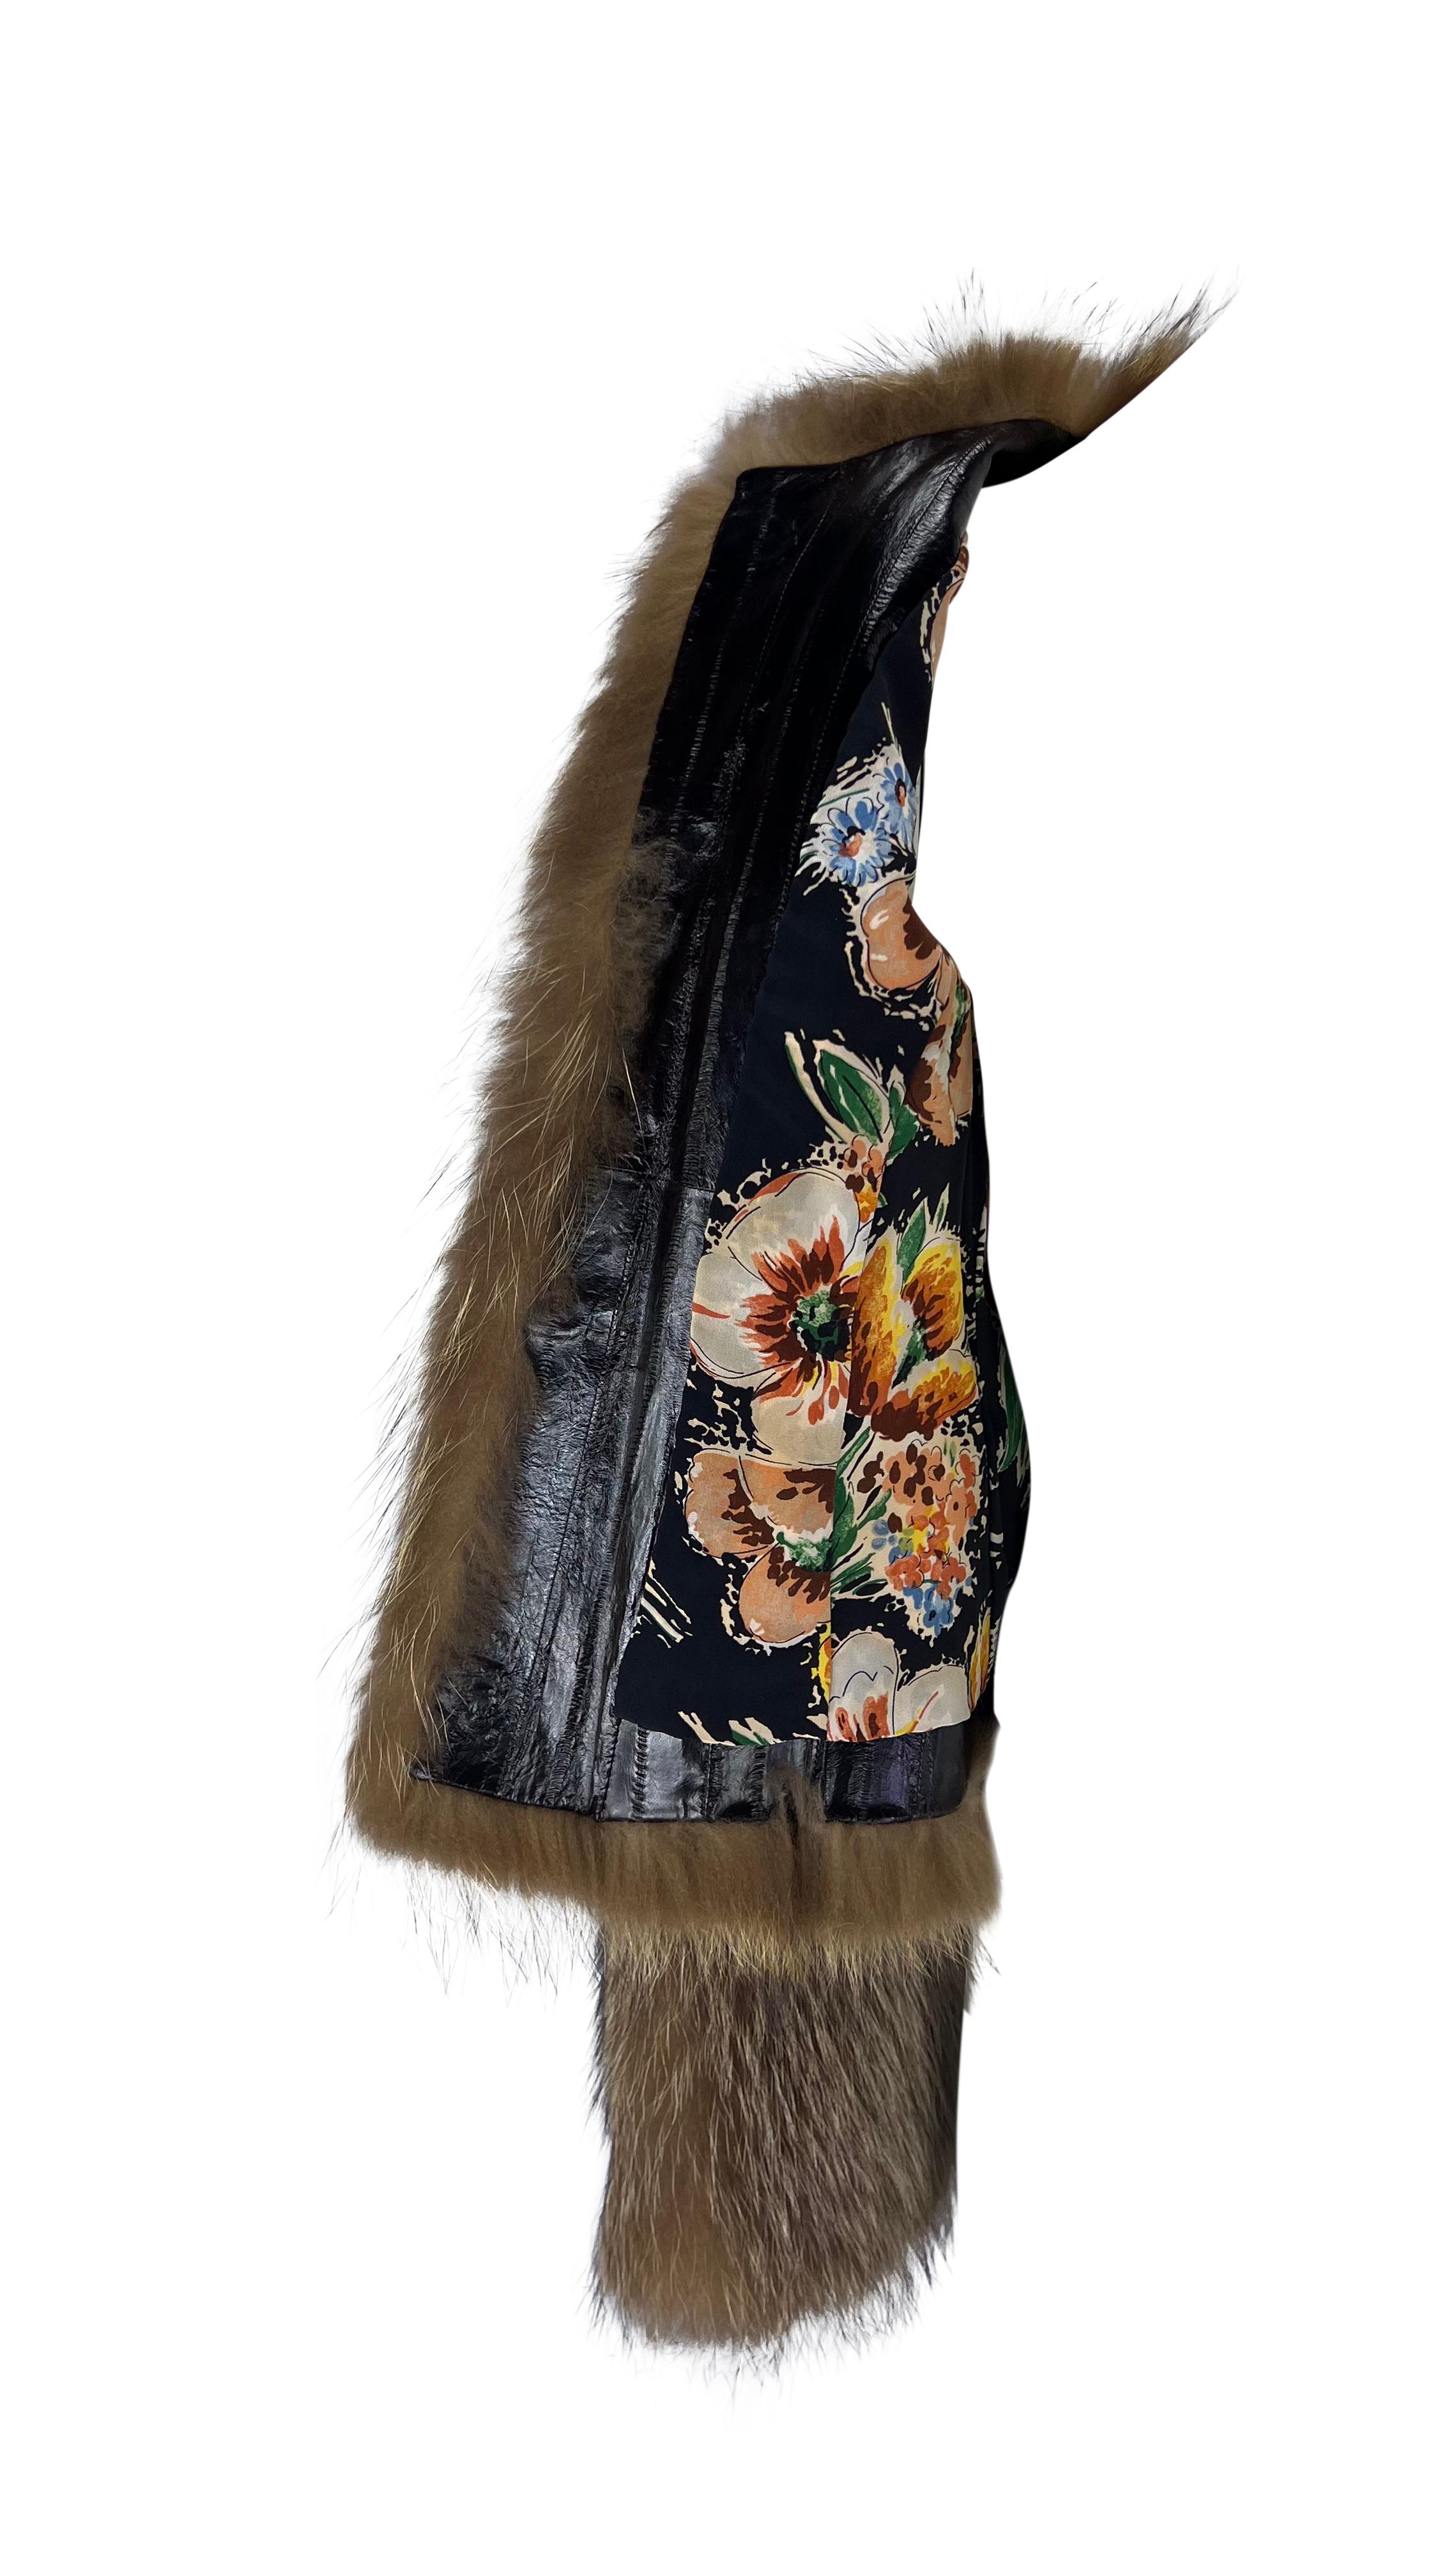 Presenting an incredible raccoon fur Dolce & Gabbana coat. From the early 2000s, this fabulous chubby-style coat is constructed entirely of brown raccoon fur and is made complete with floral silk and deep burgundy eel lining. The coat features a